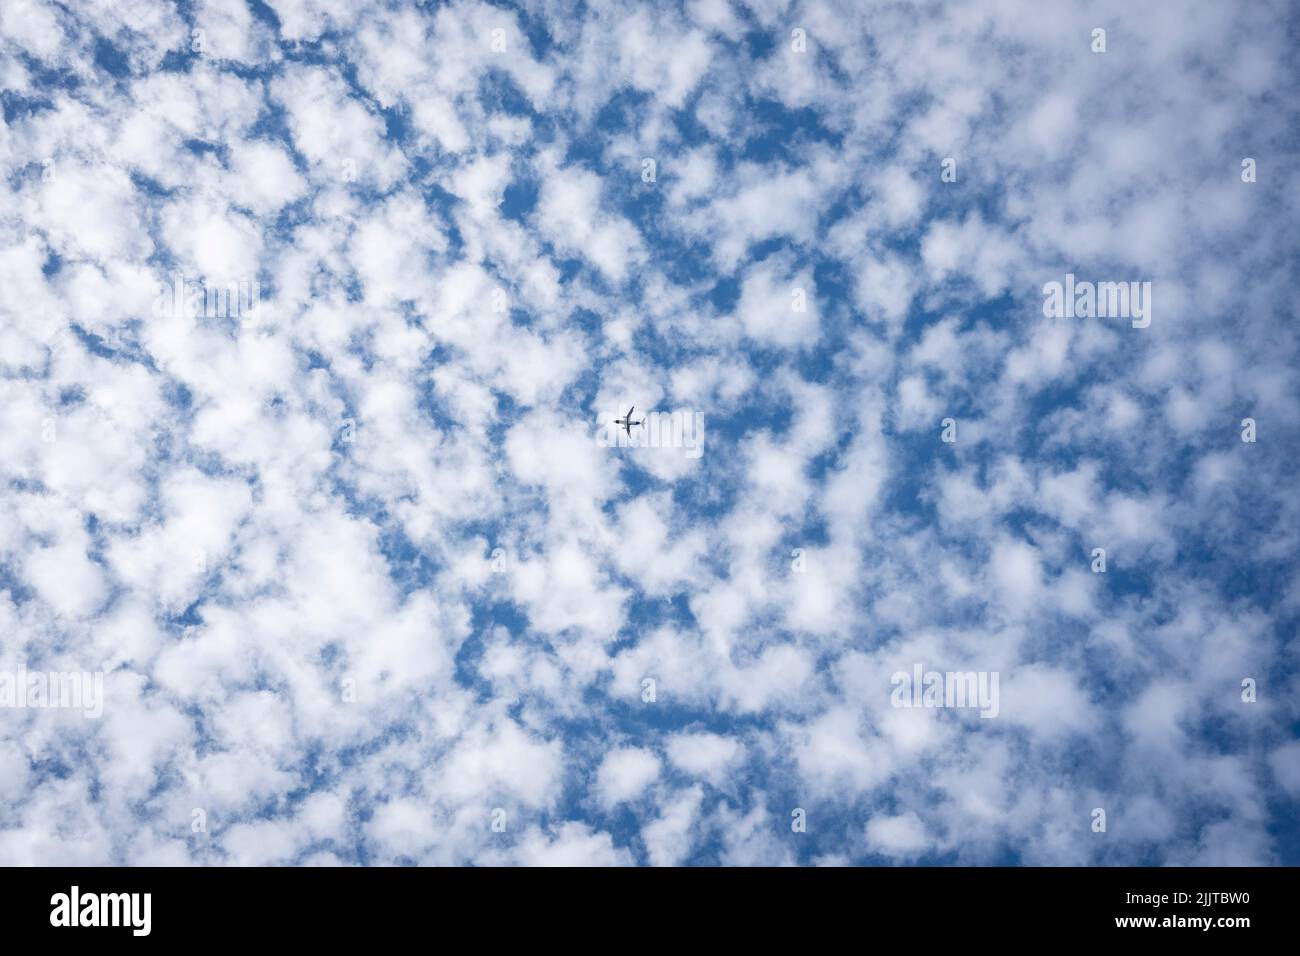 A single jet airliner flies across south London skies, its shape silhouetted against altocumulus cloud formations on its in-flight journey overhead, on 24th July 2022, in London, England. Altocumulus is a middle-altitude cloud whose altitude is between 2,000–7,000 m (7,000–23,000 ft). Stock Photo